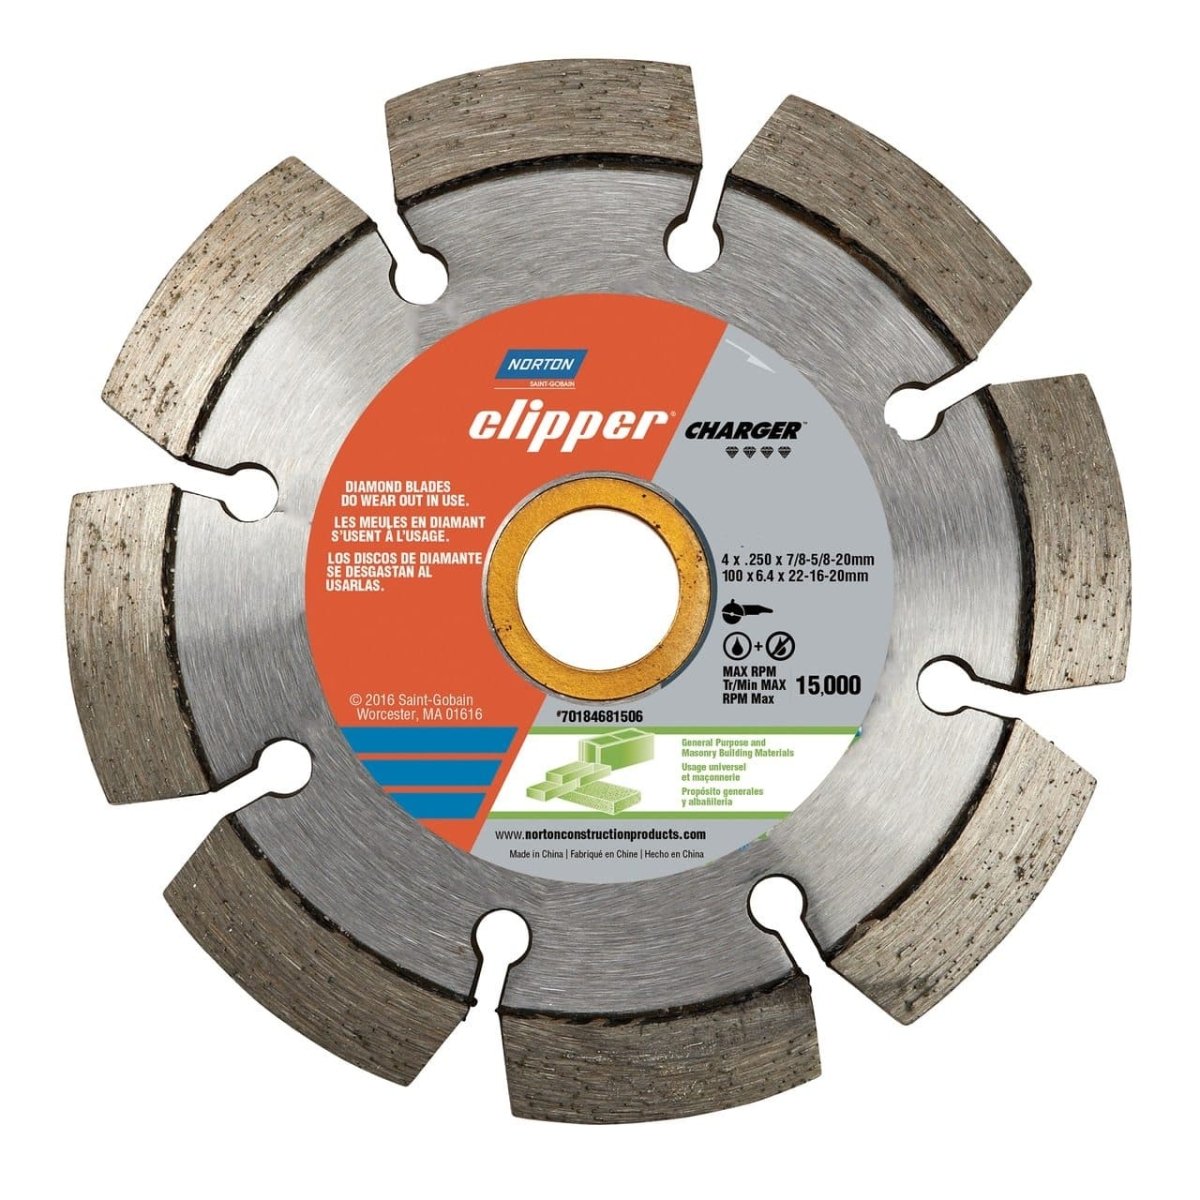 Clipper Charger Asphalt Dry Tuck Pointing Blade - Norton